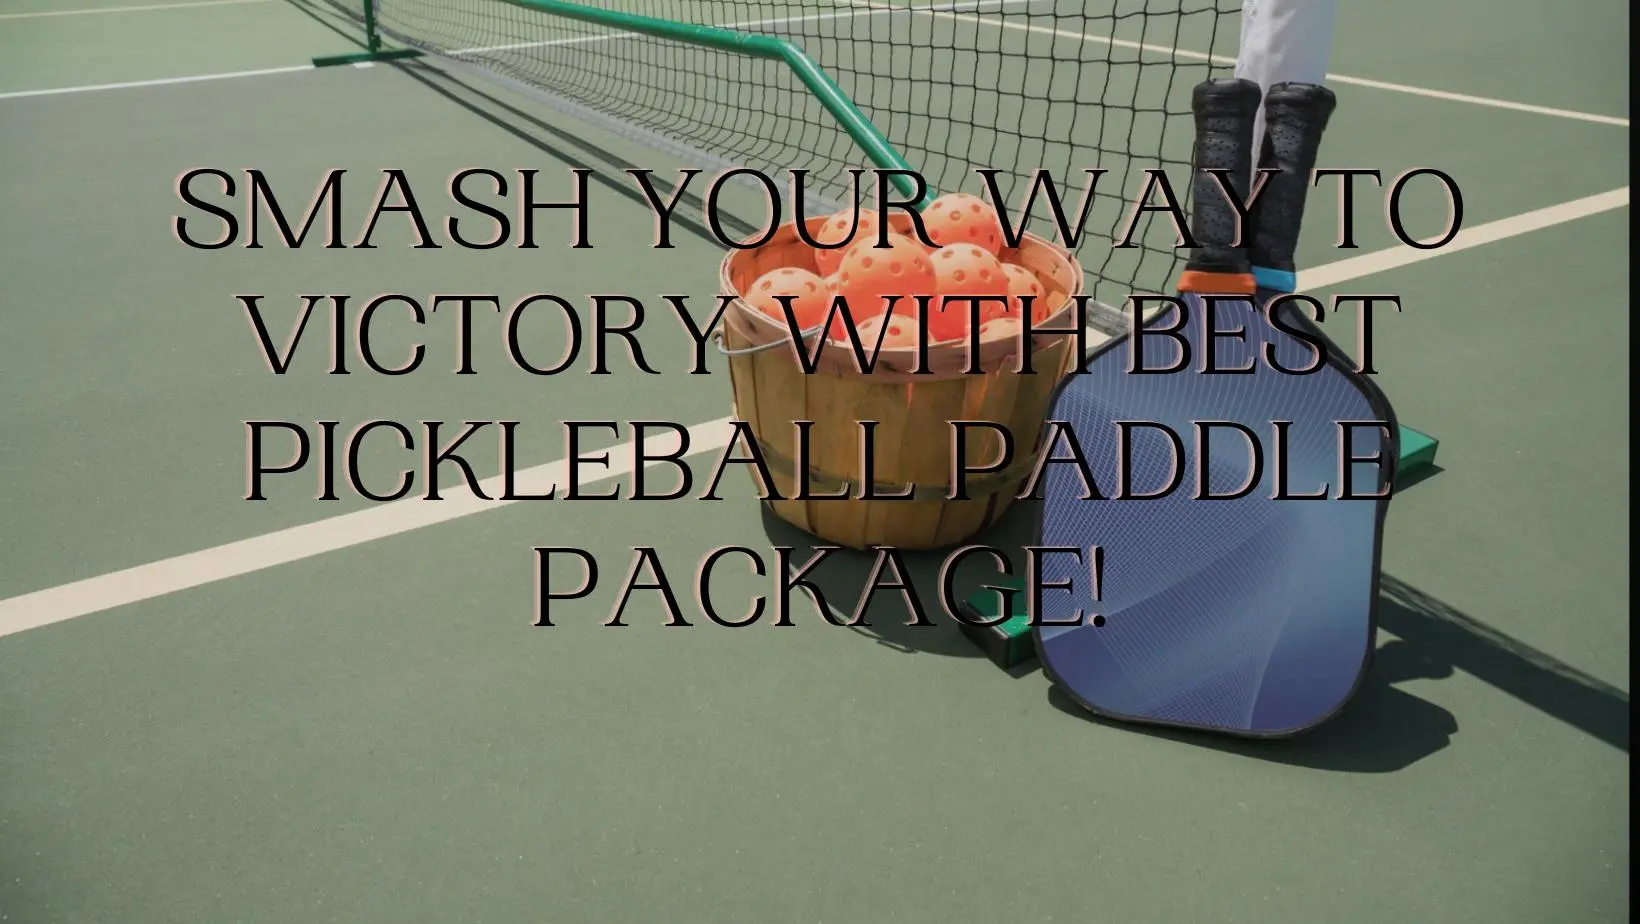 Pickleball Paddle Package